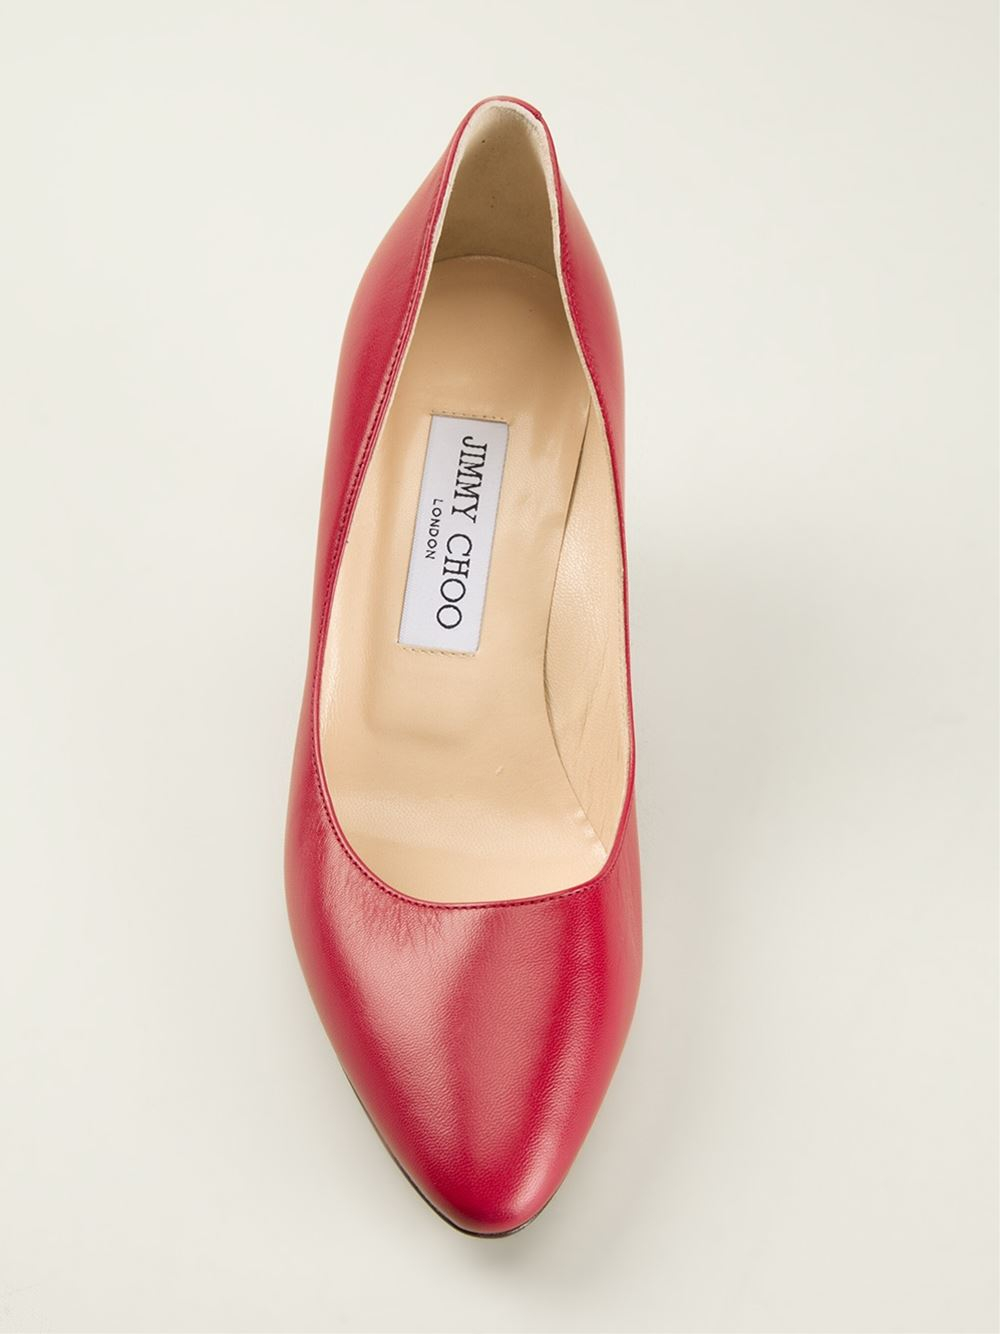 Lyst - Jimmy choo 'Match' Pumps in Red